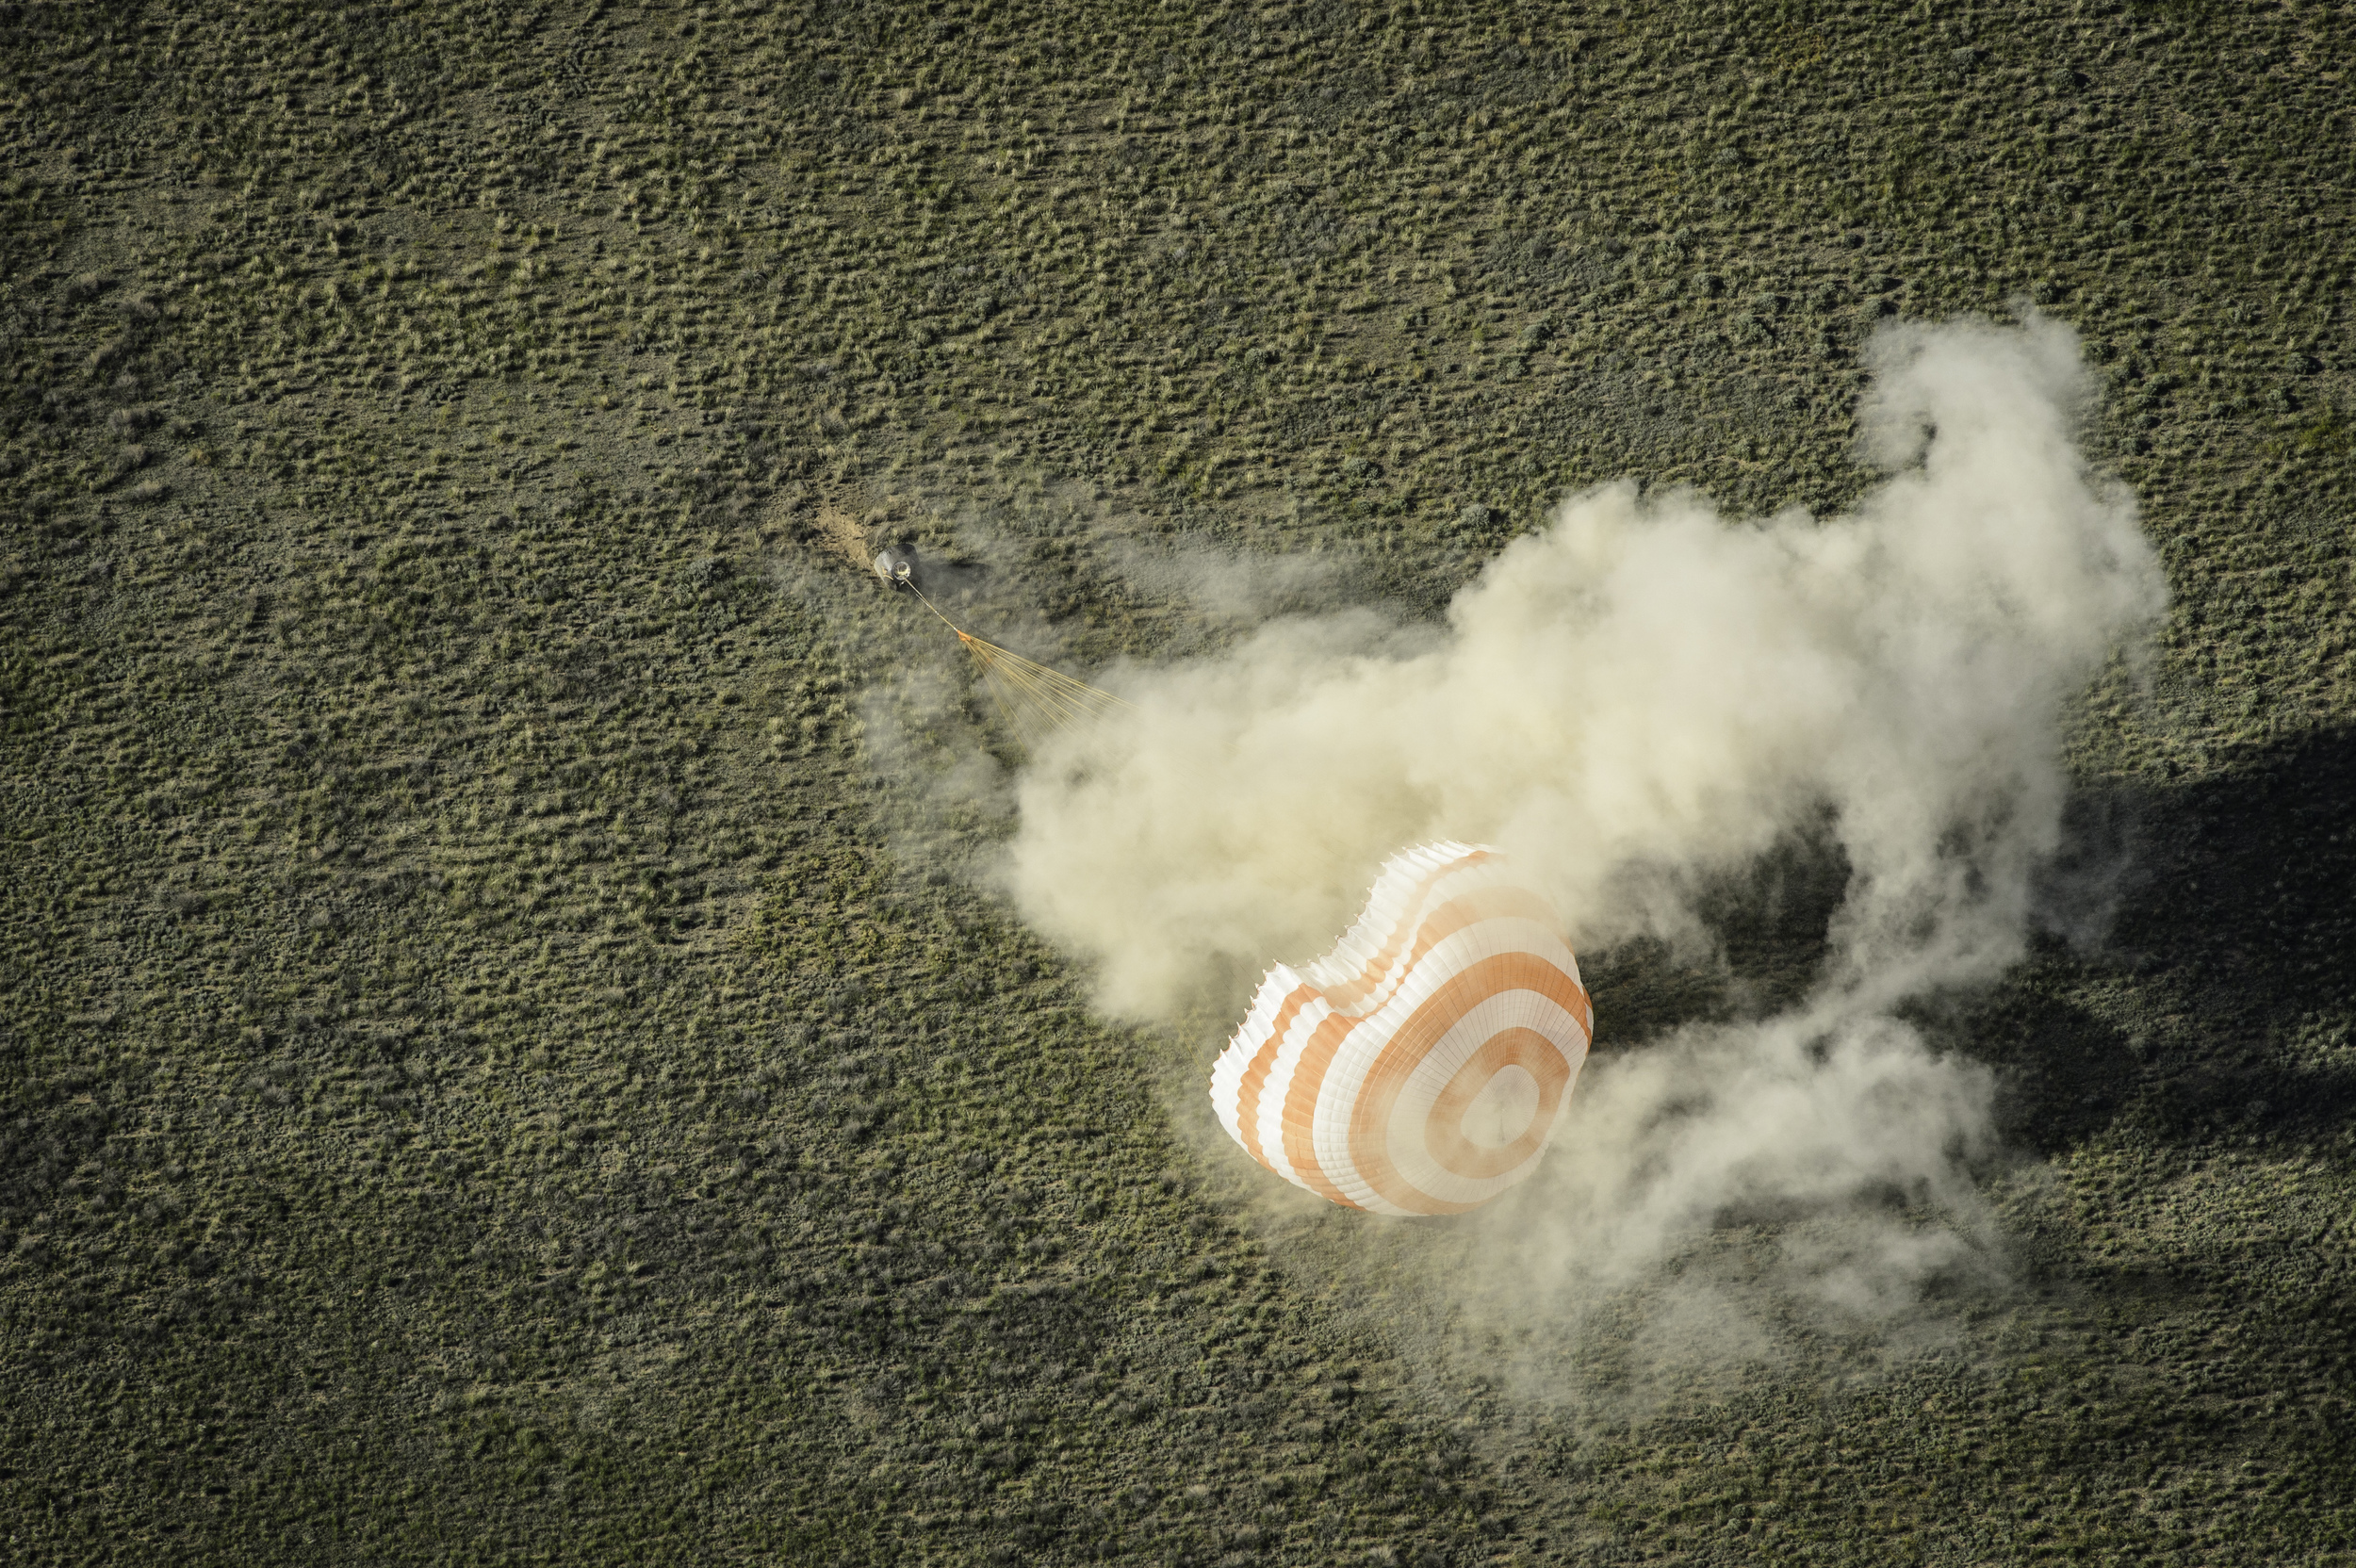  The Soyuz TMA-07M spacecraft is seen as it lands with Expedition 35 Commander Chris Hadfield of the Canadian Space Agency (CSA), NASA Flight Engineer Tom Marshburn and Russian Flight Engineer Roman Romanenko of the Russian Federal Space Agency (Rosc